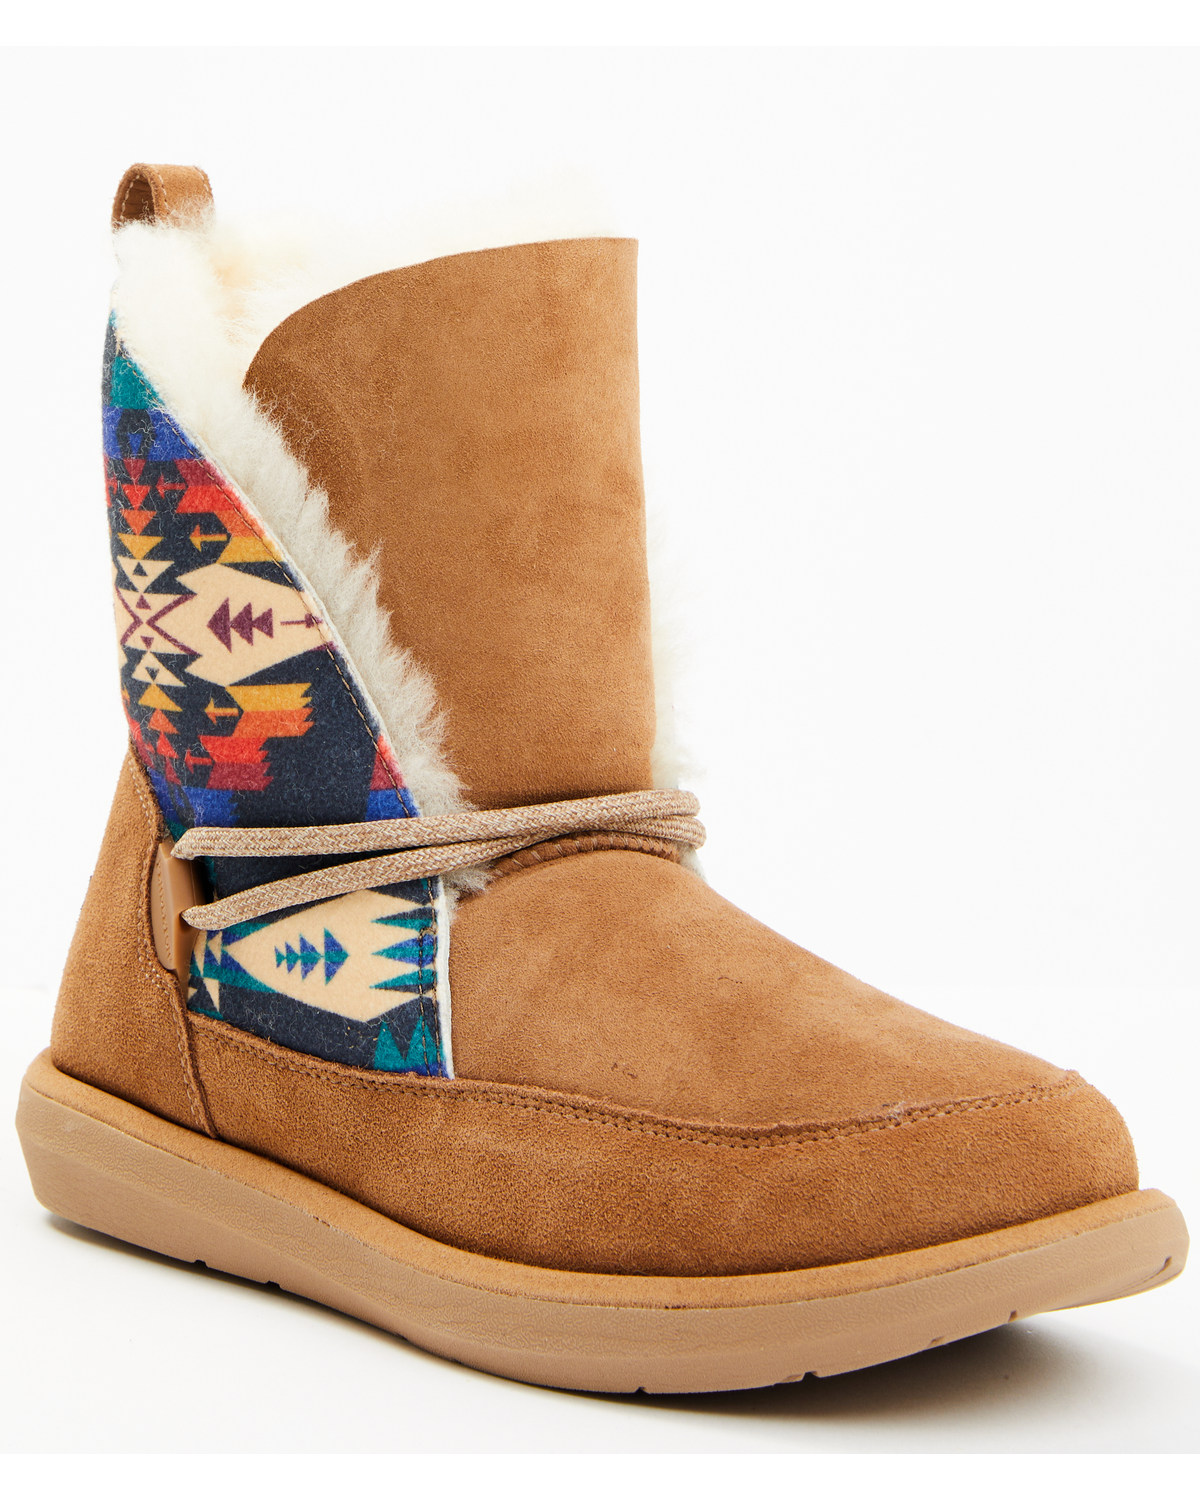 Pendleton Women's Tie-Back Casual Western Boots - Round Toe